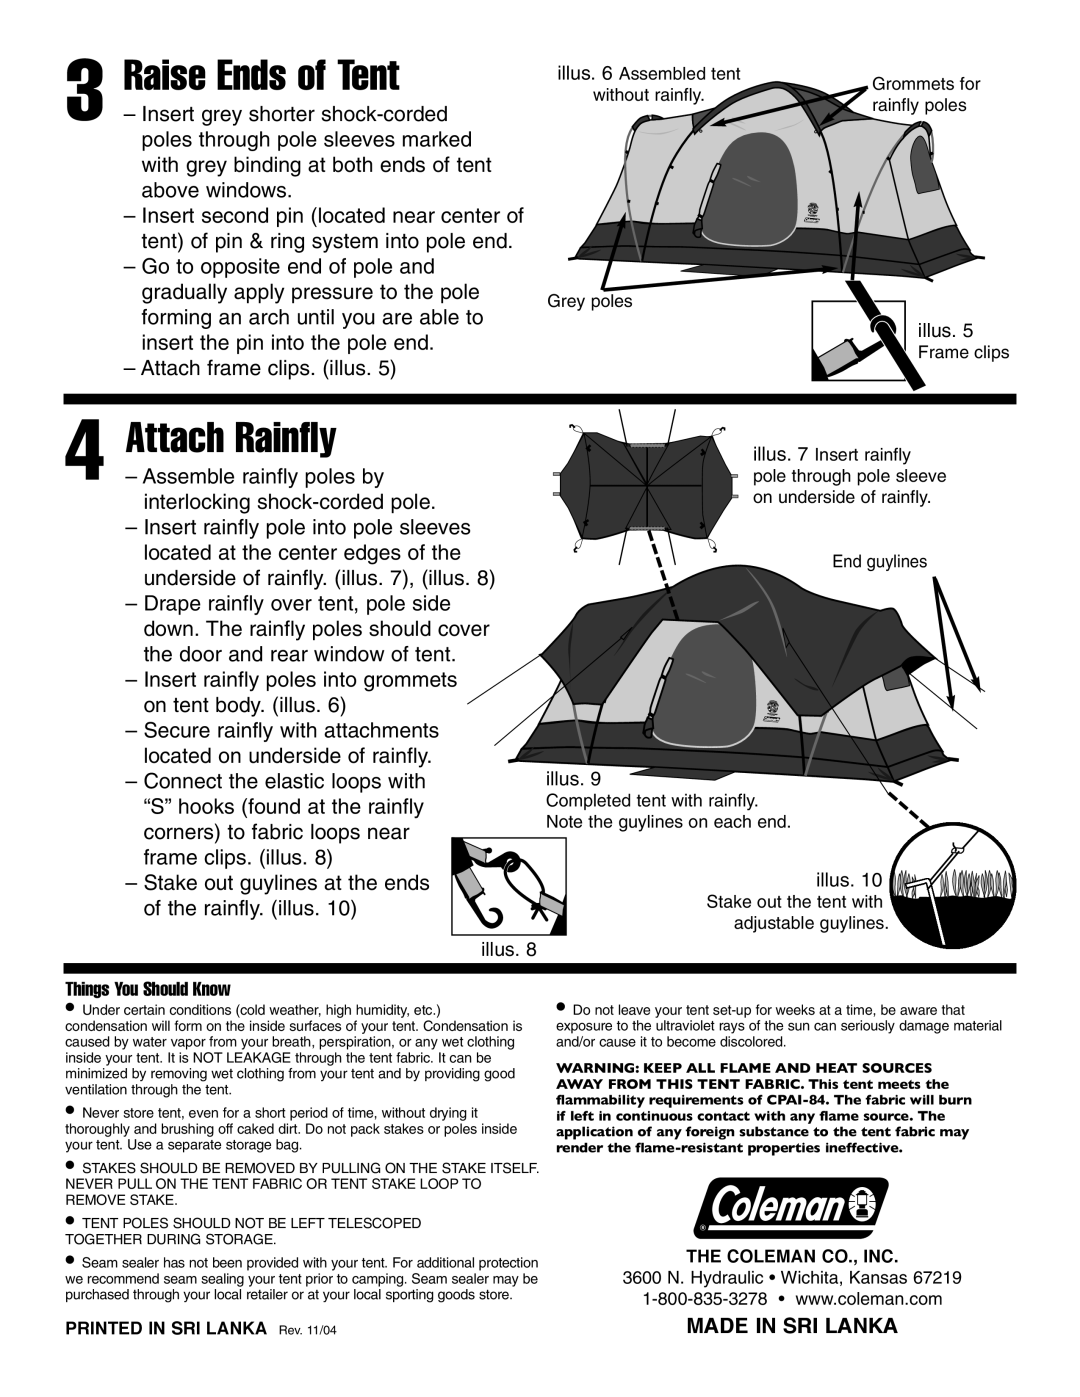 Coleman 9250-147 manual Raise Ends of Tent, Attach Rainfly, Made In Sri Lanka 